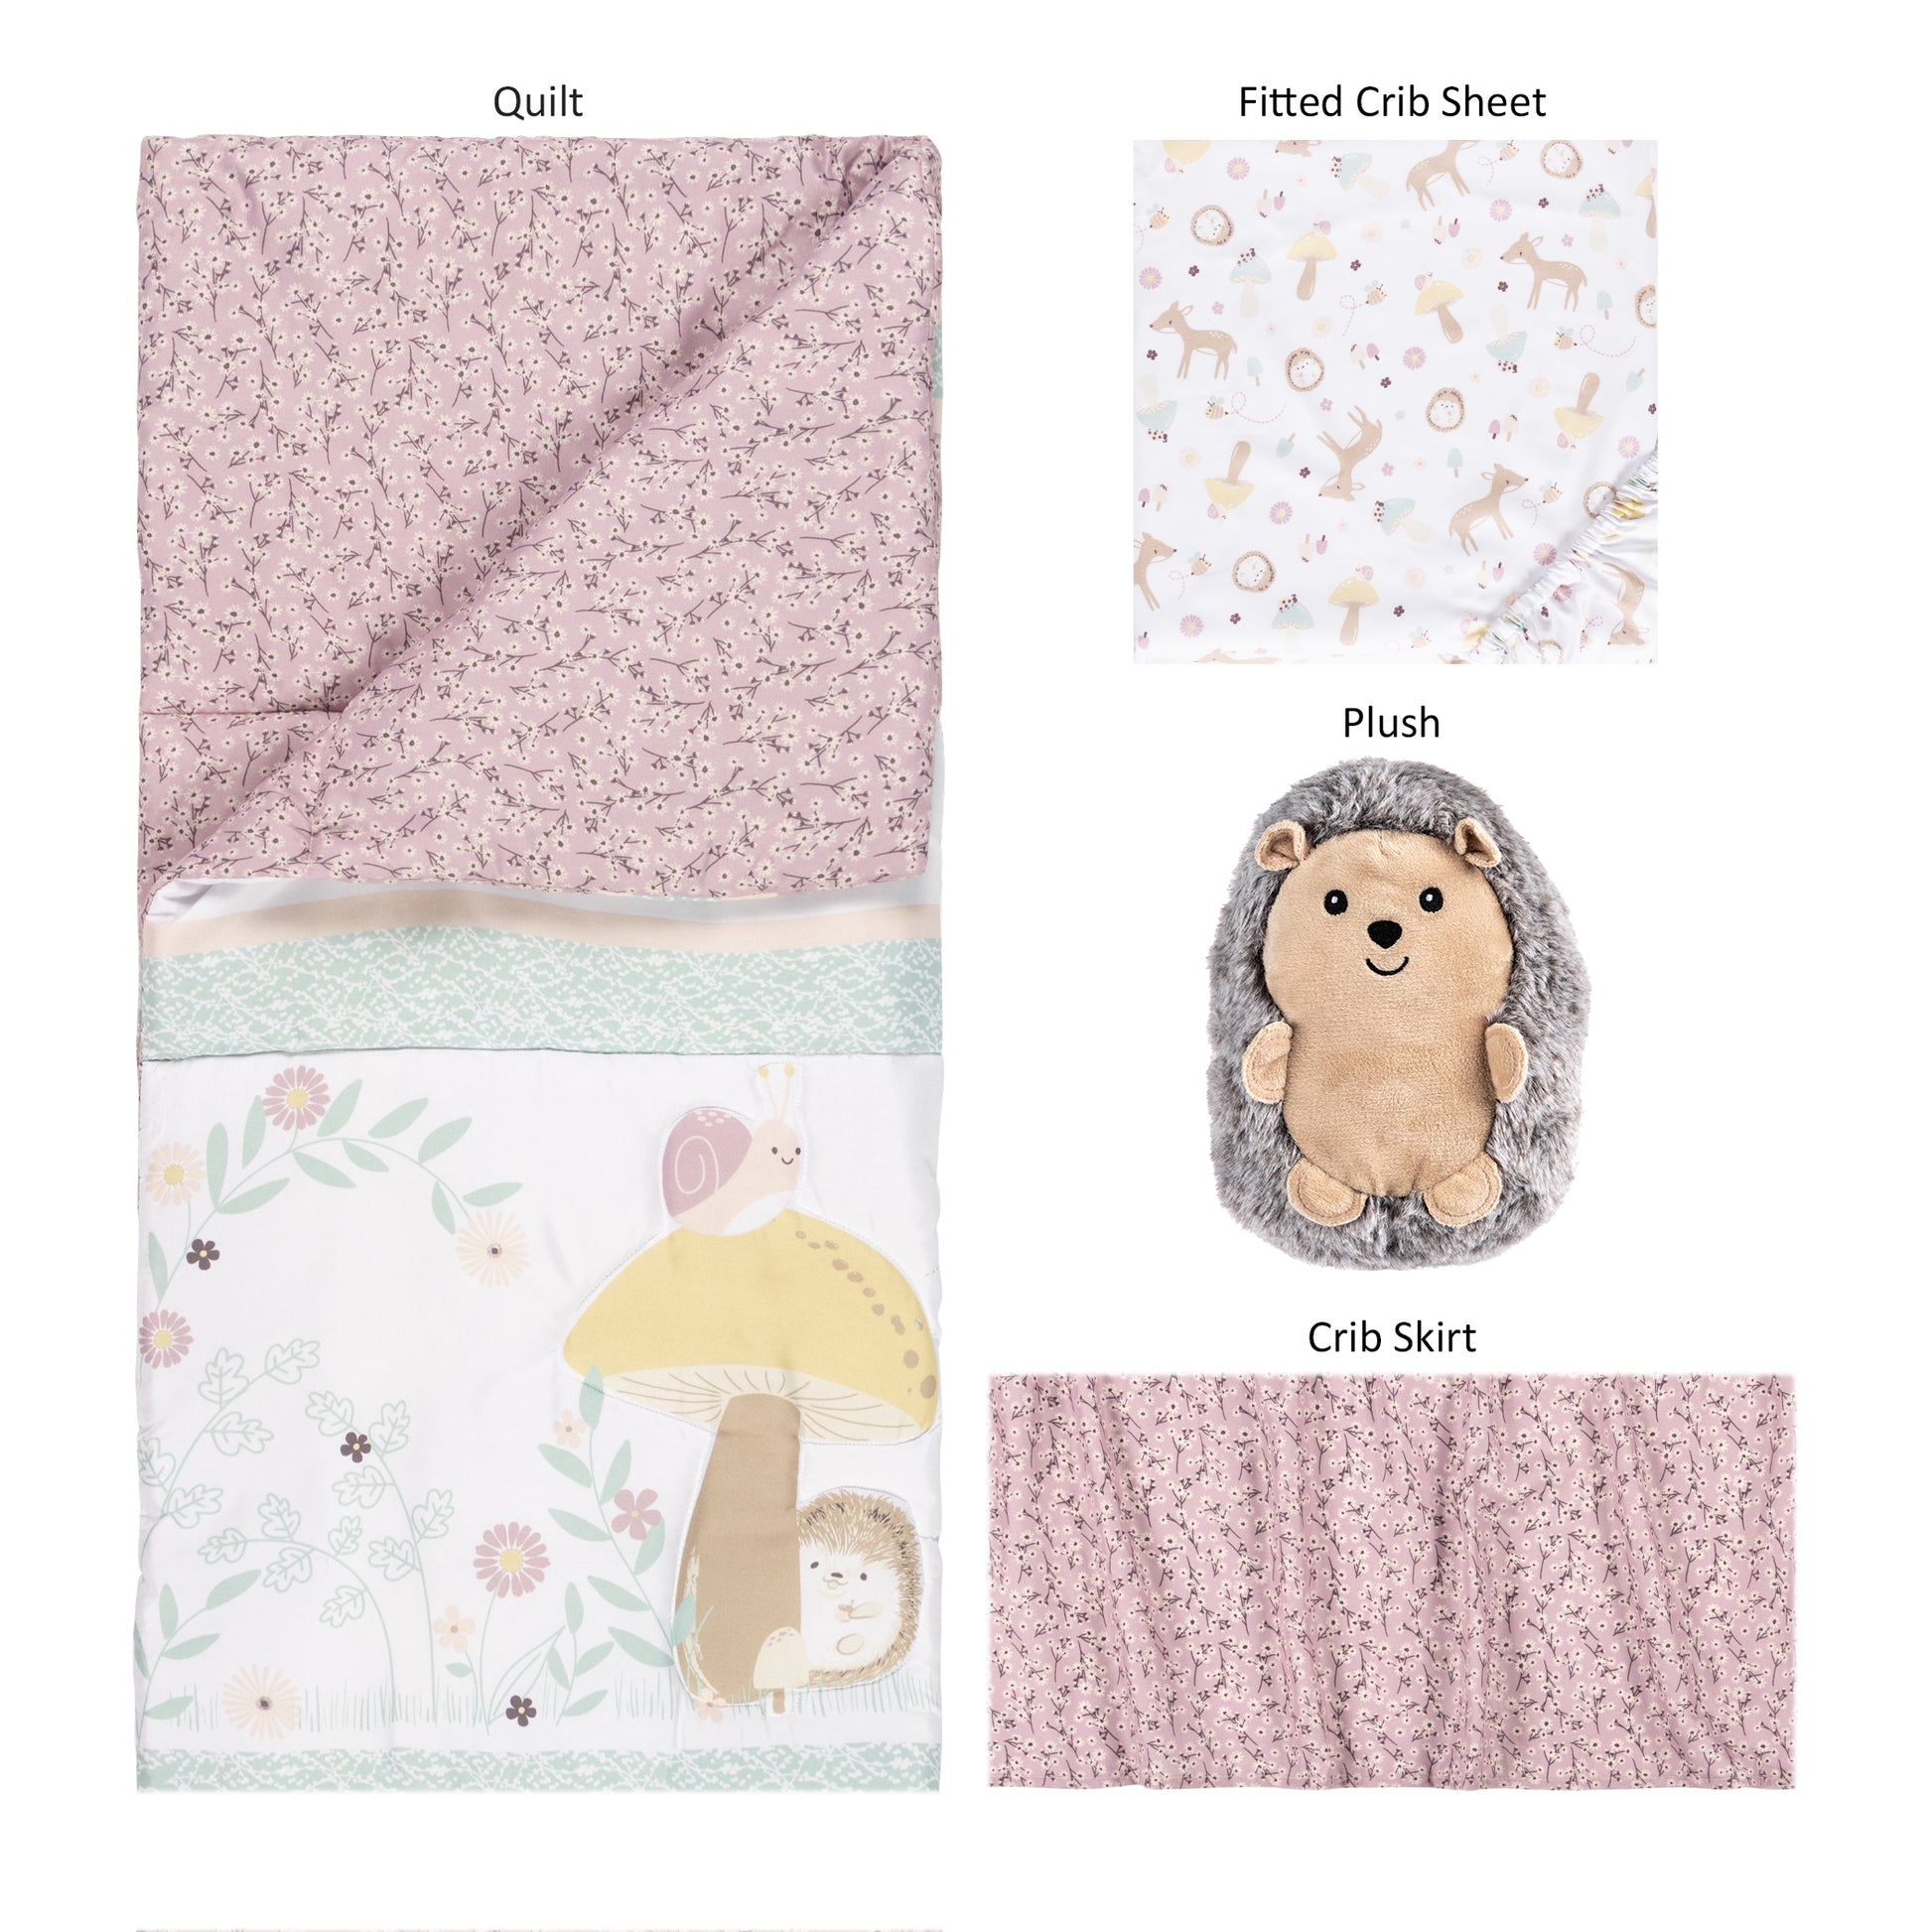  Enchanted Garden 4 Piece Crib Bedding Set by Sammy & Lou®; pieces laid out includes, nursery quilt/playmat, crib sheet, crib skirt and hedgehog plush toy